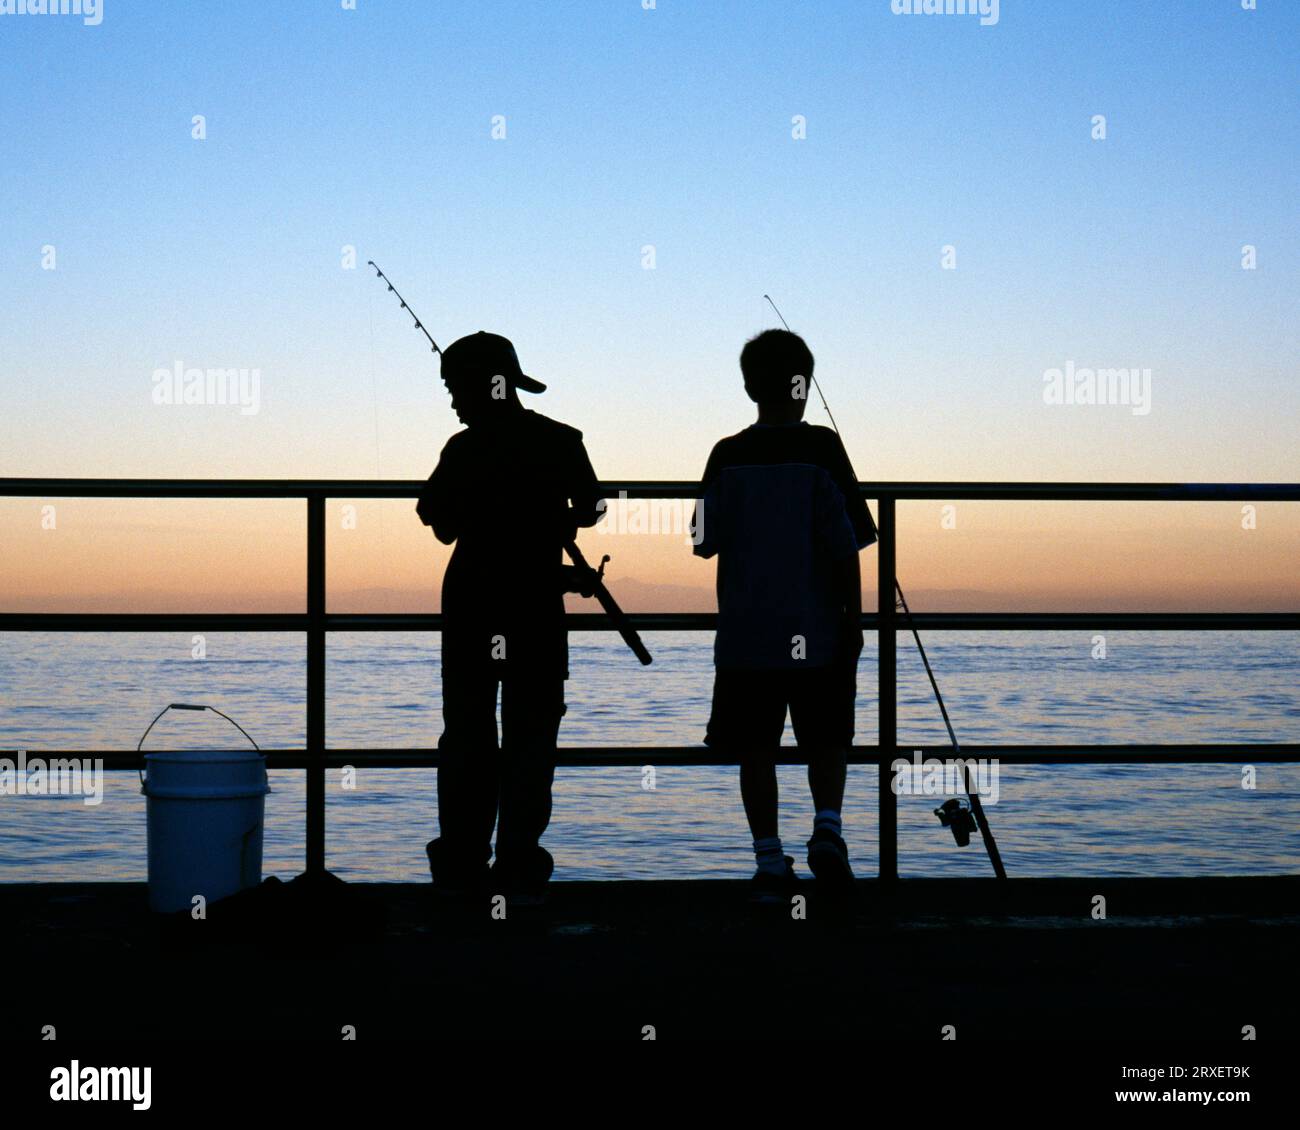 Rear view of two boys with fishing poles silhouetted on a pier at twilight. California. Stock Photo